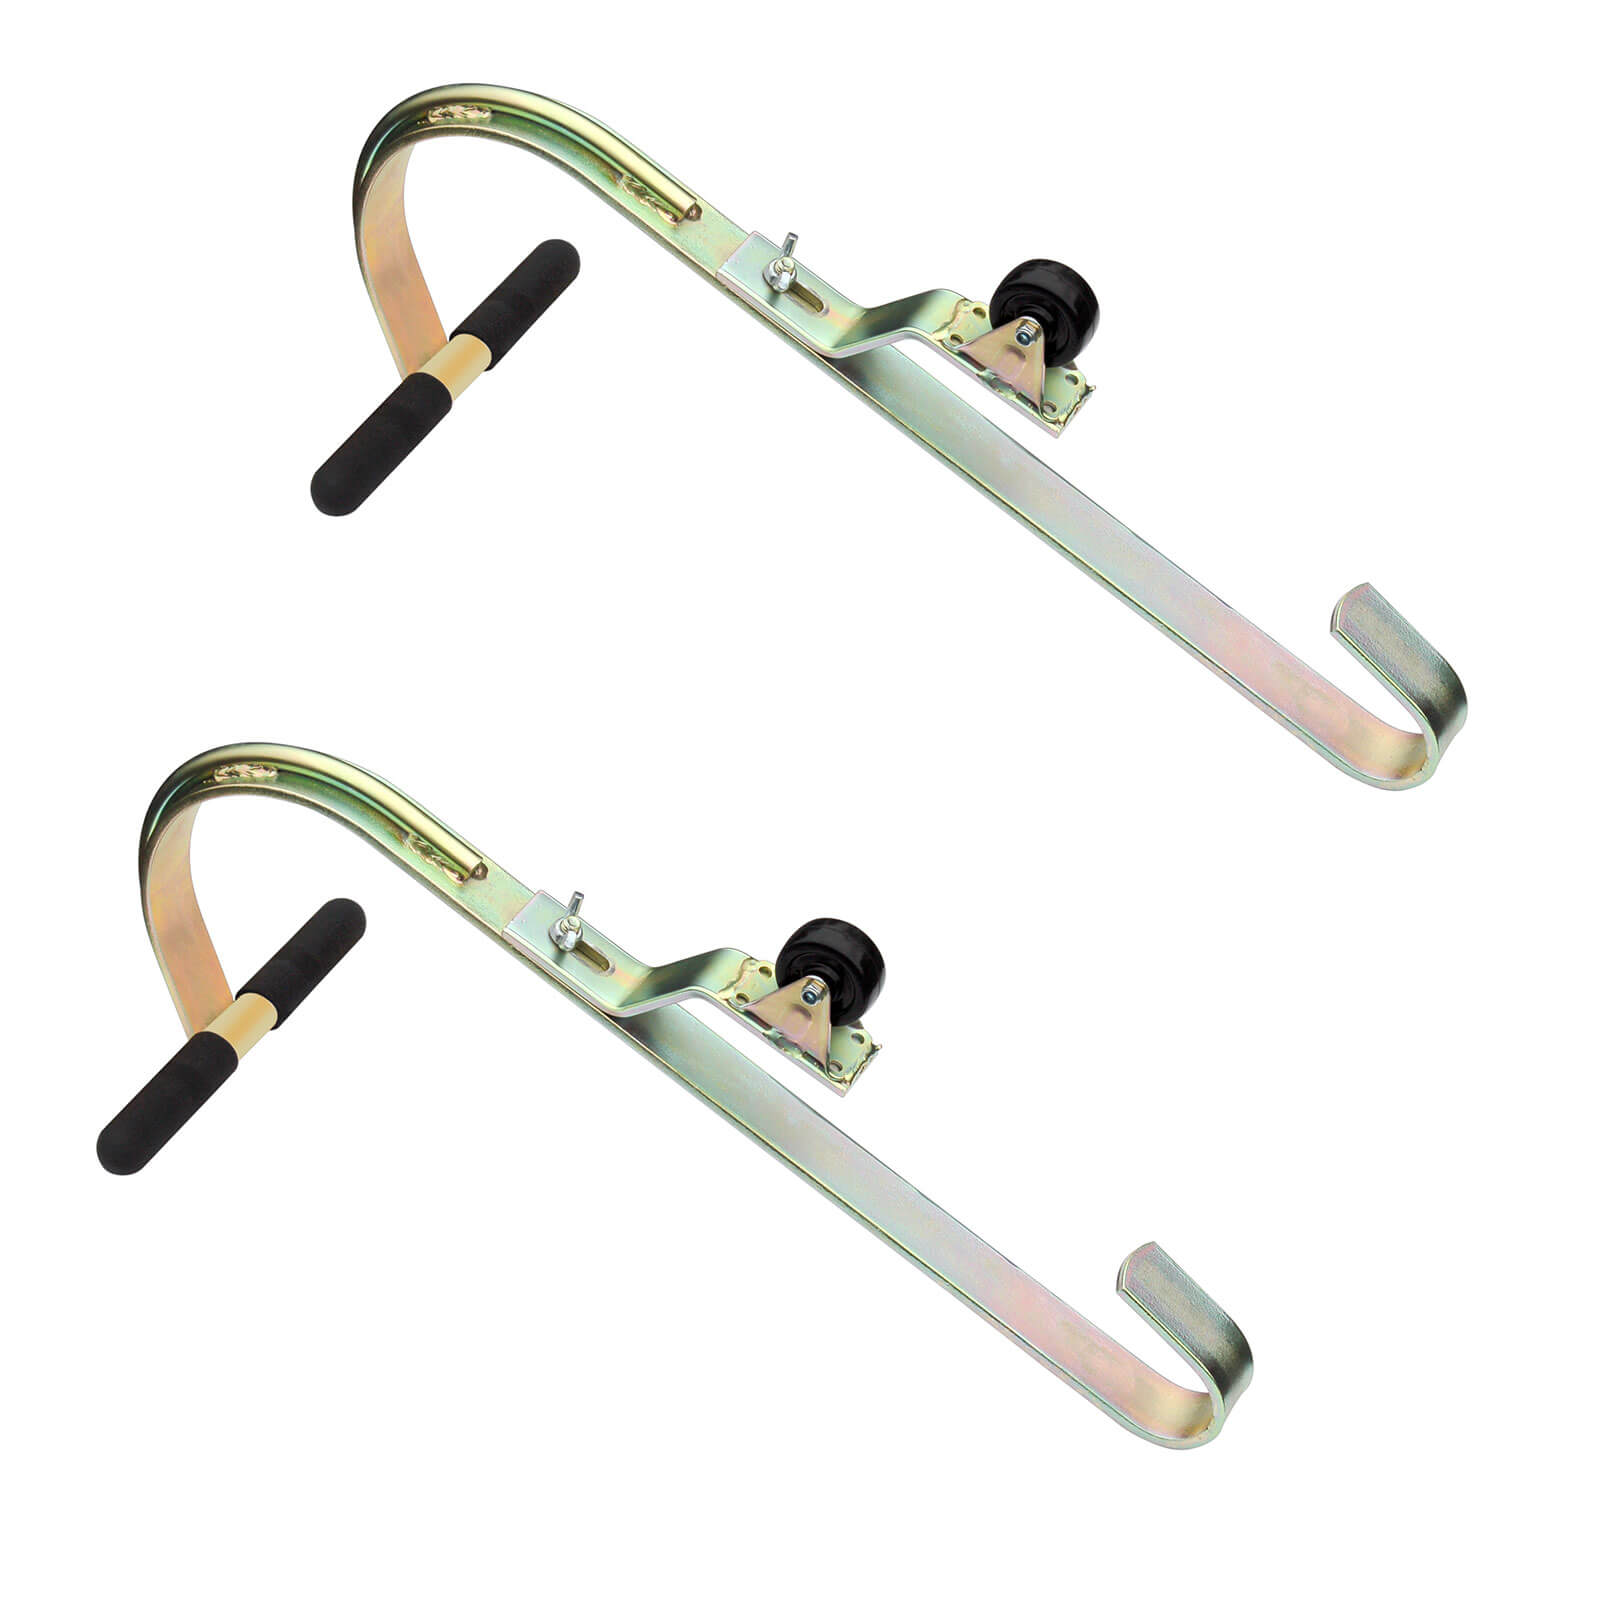 Roof Zone Ladder Hook with Wheel